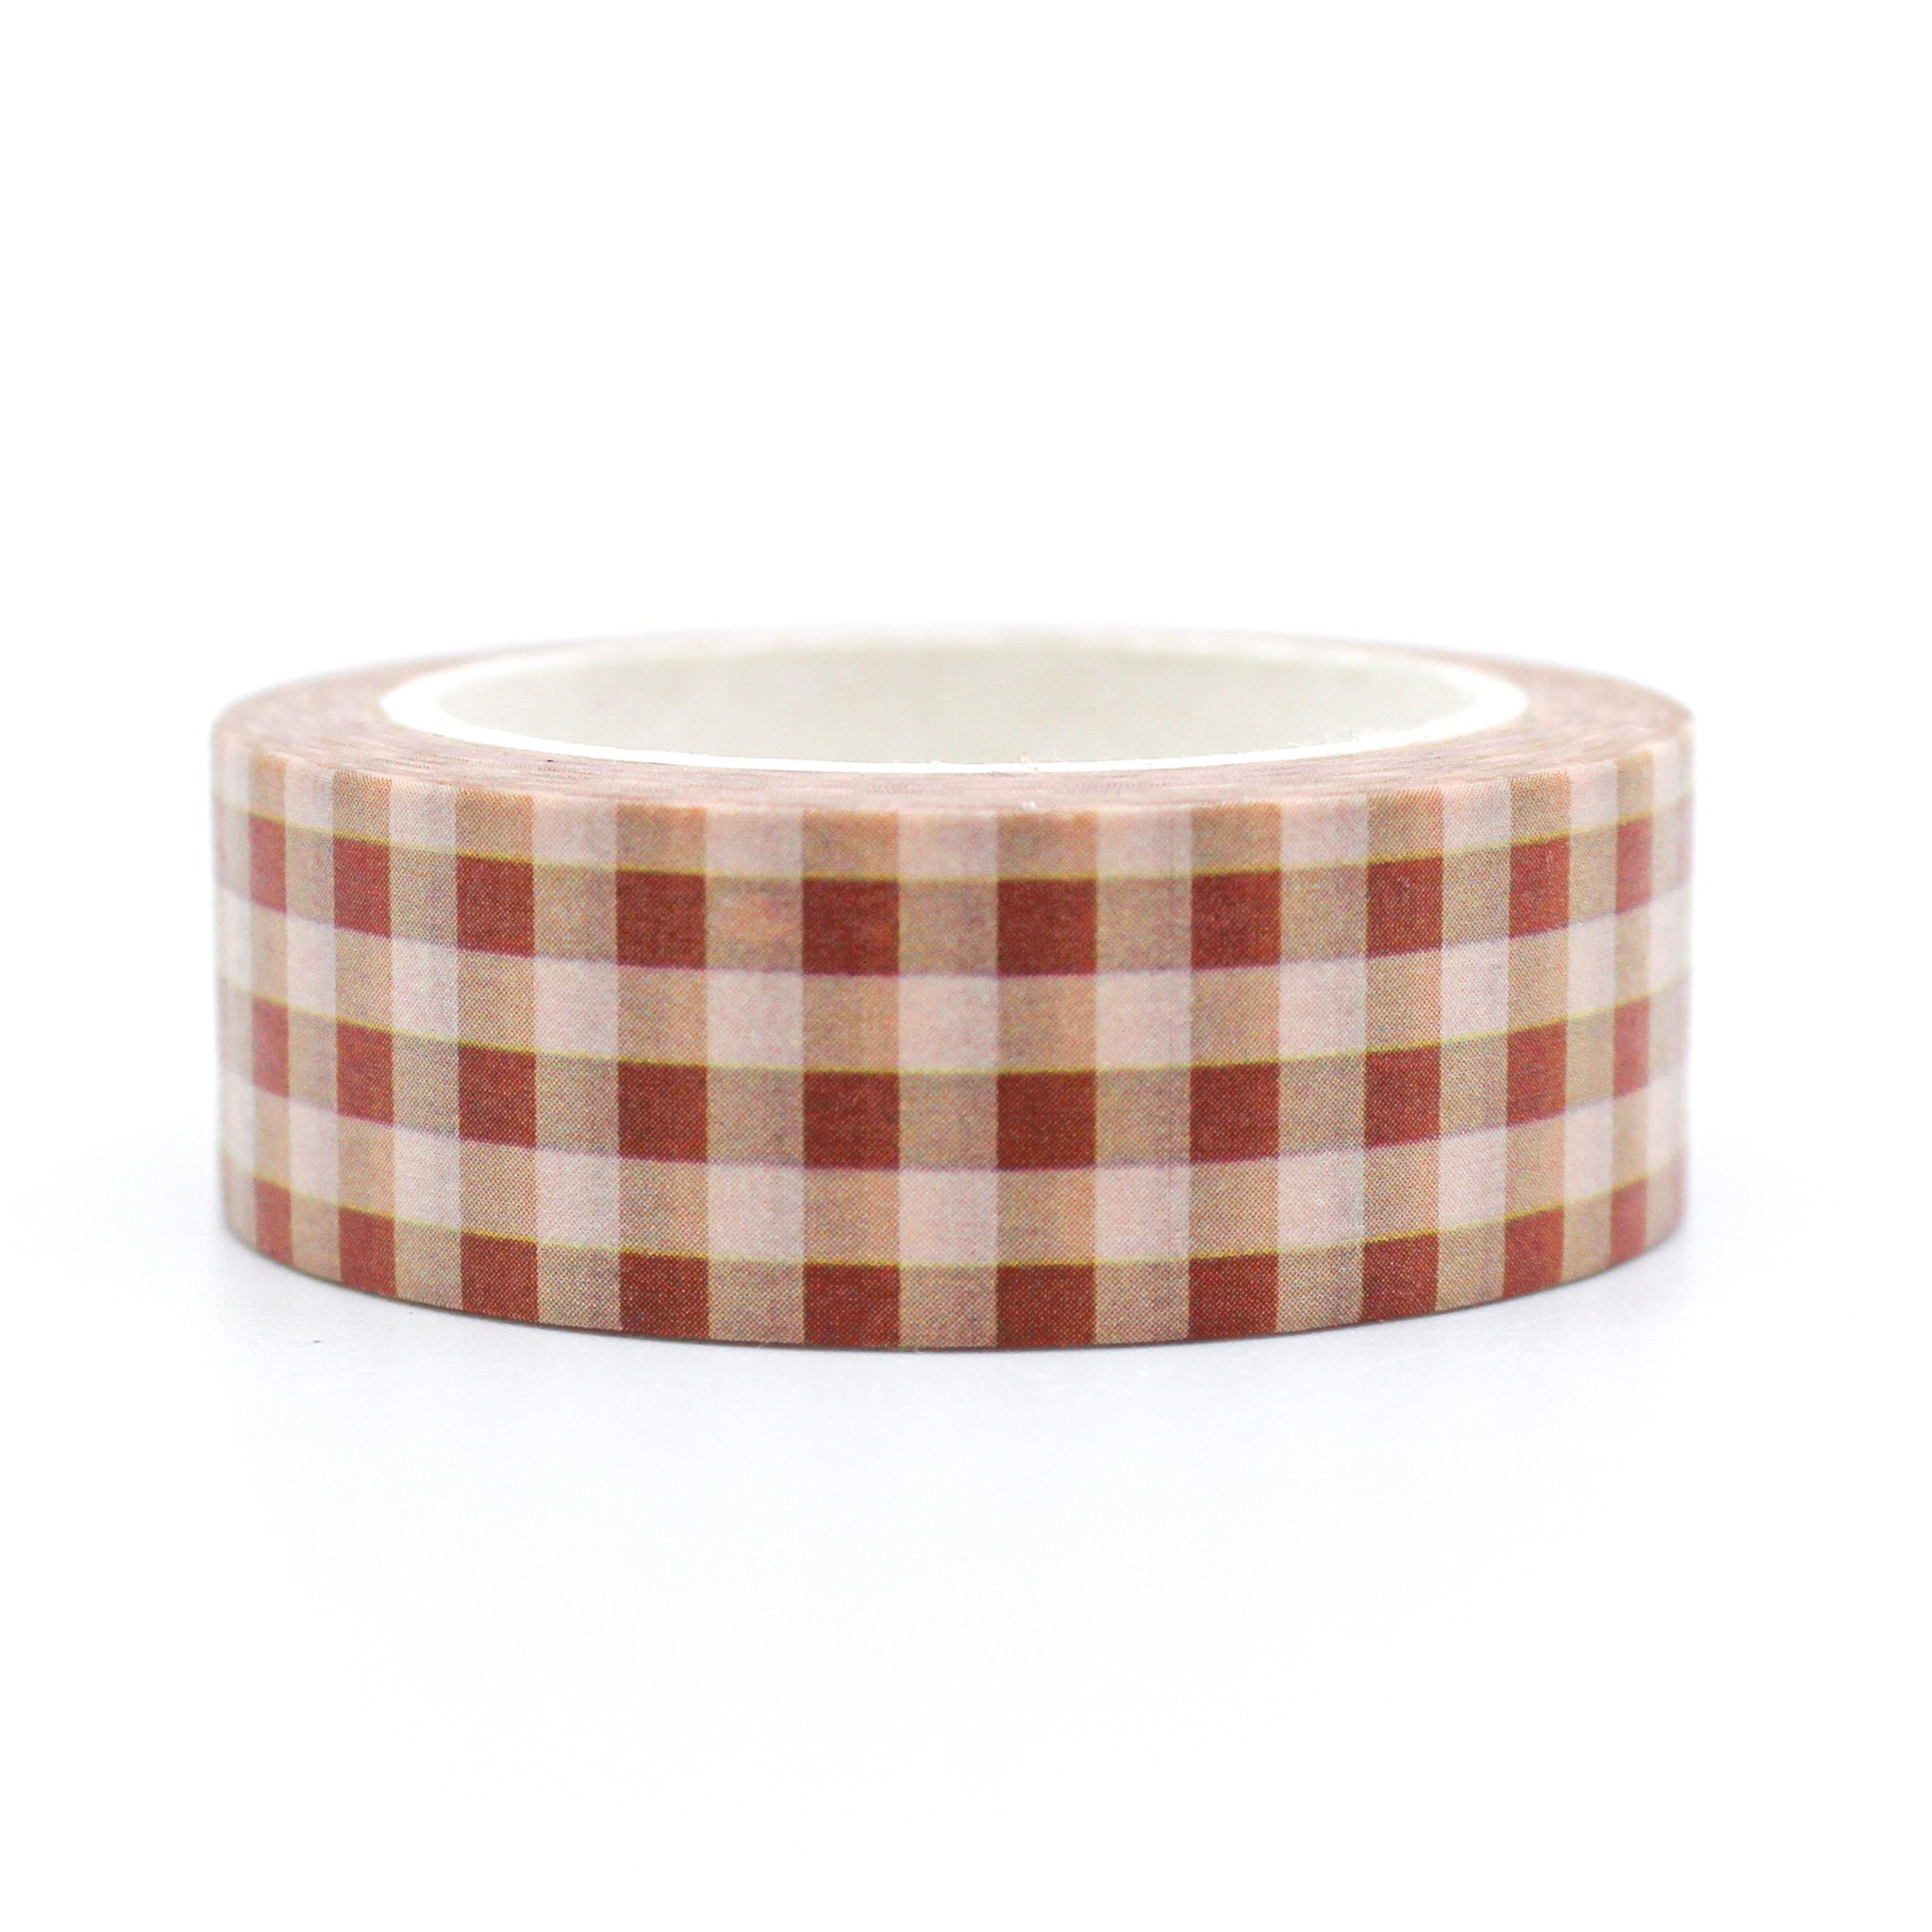 This is a yellow and red plaid pattern washi tape from BBB Supplies Craft Shop